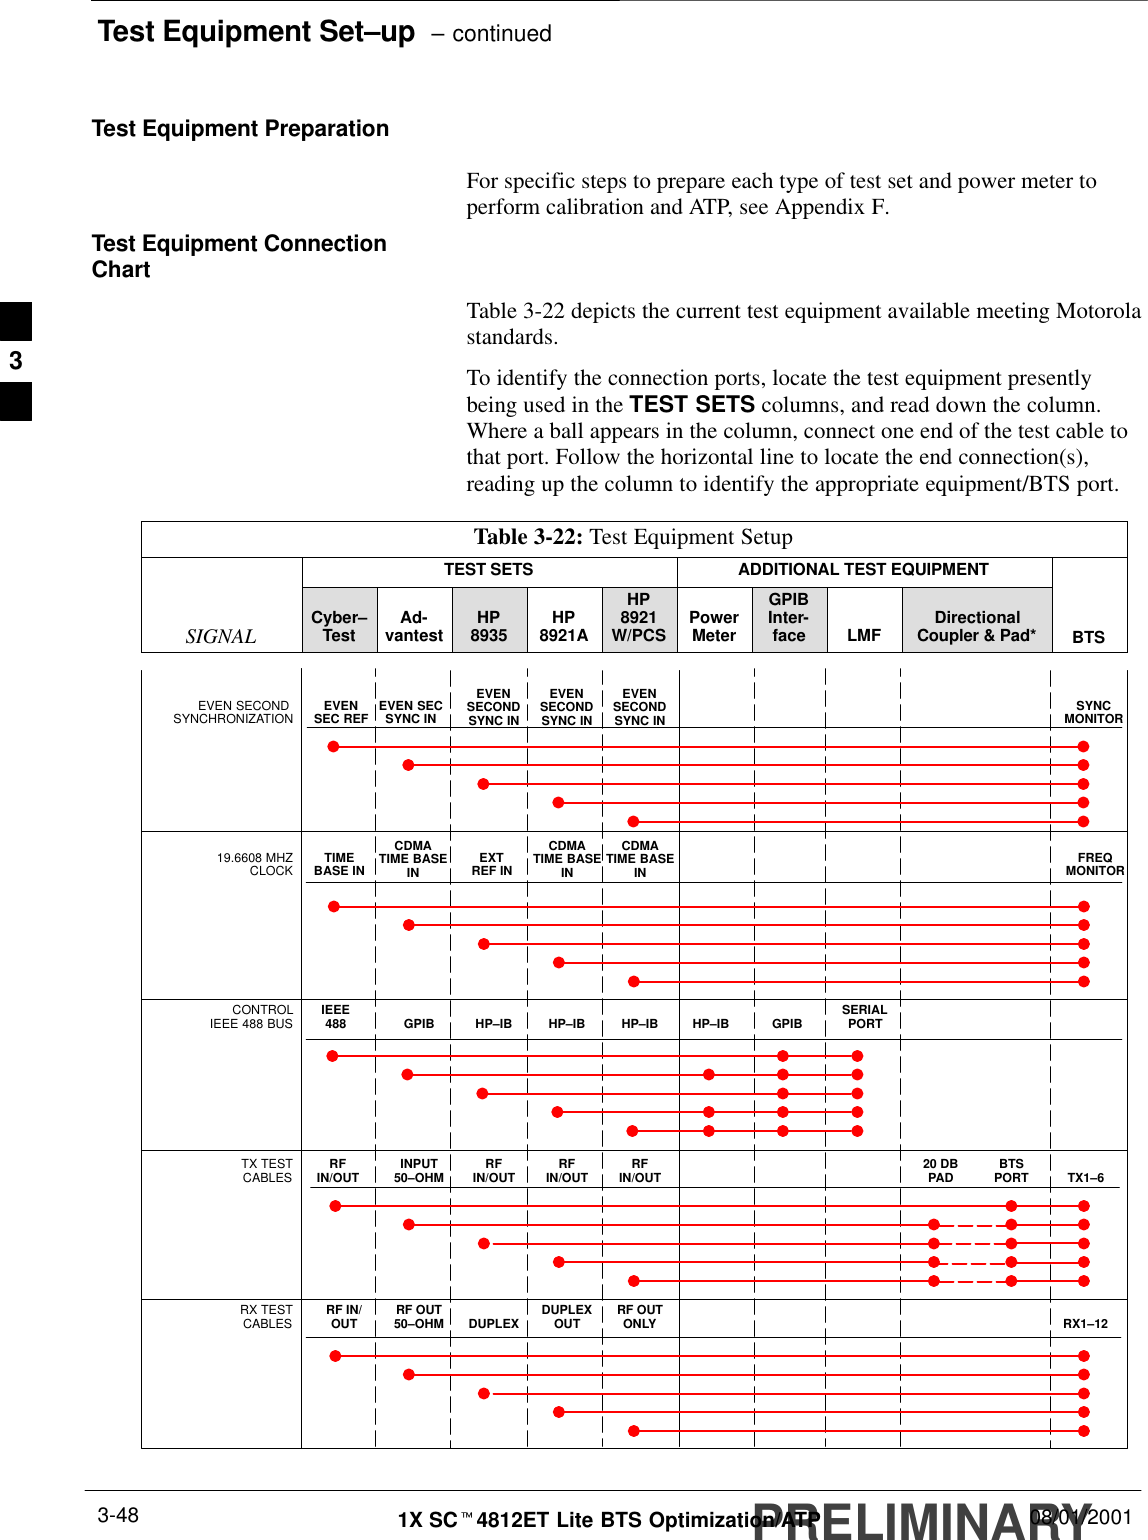 Test Equipment Set–up  – continuedPRELIMINARY1X SCt4812ET Lite BTS Optimization/ATP 08/01/20013-48Test Equipment PreparationFor specific steps to prepare each type of test set and power meter toperform calibration and ATP, see Appendix F.Test Equipment ConnectionChartTable 3-22 depicts the current test equipment available meeting Motorolastandards.To identify the connection ports, locate the test equipment presentlybeing used in the TEST SETS columns, and read down the column.Where a ball appears in the column, connect one end of the test cable tothat port. Follow the horizontal line to locate the end connection(s),reading up the column to identify the appropriate equipment/BTS port.Table 3-22: Test Equipment SetupTEST SETS ADDITIONAL TEST EQUIPMENTSIGNAL Cyber–Test Ad-vantest HP8935 HP8921AHP8921W/PCS PowerMeterGPIBInter-face LMF DirectionalCoupler &amp; Pad* BTSEVEN SECOND SYNCHRONIZATION EVENSEC REF EVEN SECSYNC INEVENSECONDSYNC INEVENSECONDSYNC INEVENSECONDSYNC IN19.6608 MHZCLOCK TIMEBASE INCDMATIME BASEIN EXTREF INCDMATIME BASEINCDMATIME BASEINCONTROLIEEE 488 BUS IEEE488 GPIB HP–IB HP–IB GPIB SERIALPORTHP–IB HP–IBTX TESTCABLES RFIN/OUT INPUT50–OHM RFIN/OUT TX1–6RFIN/OUT RFIN/OUT 20 DBPAD BTSPORTRX TESTCABLES RF IN/OUT RF OUT50–OHM DUPLEX RX1–12DUPLEXOUT RF OUTONLYSYNCMONITORFREQMONITOR3